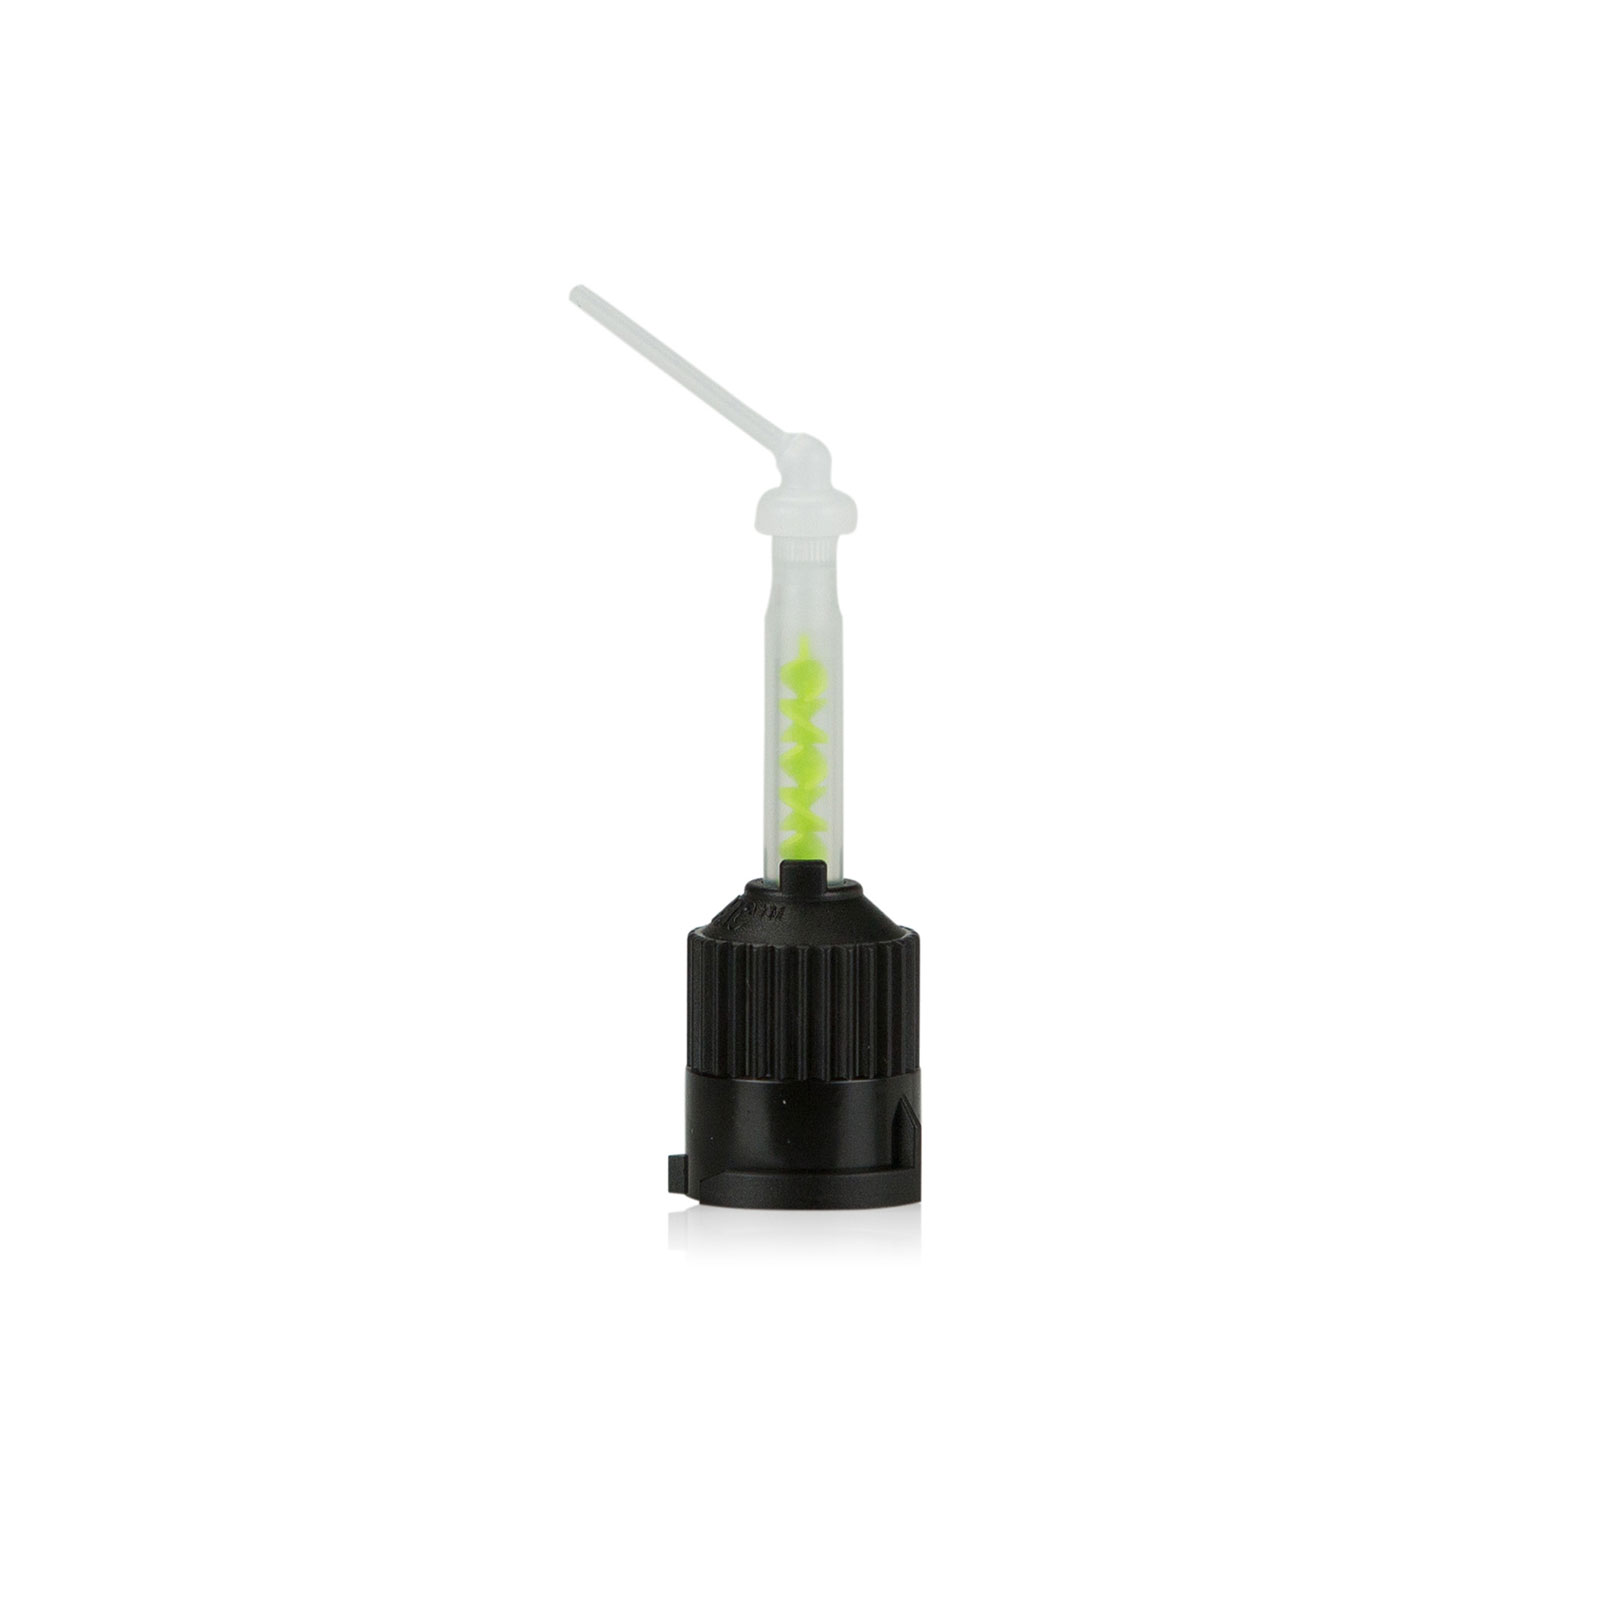 INSERTI ROOT CANAL MULTICORE 645955 5pz